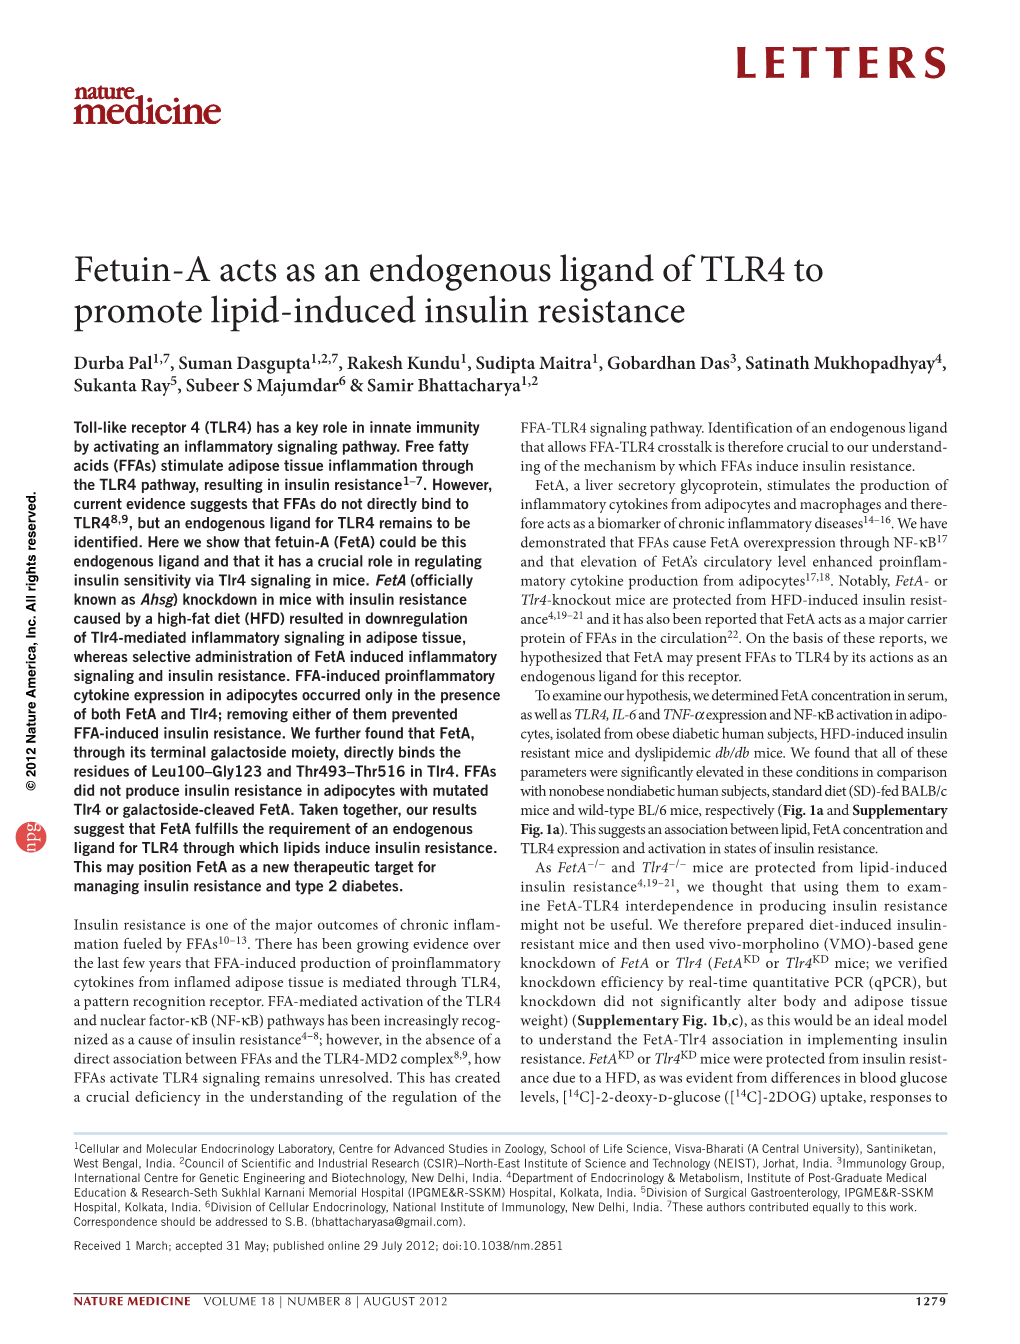 Fetuin-A Acts As an Endogenous Ligand of TLR4 to Promote Lipid-Induced Insulin Resistance